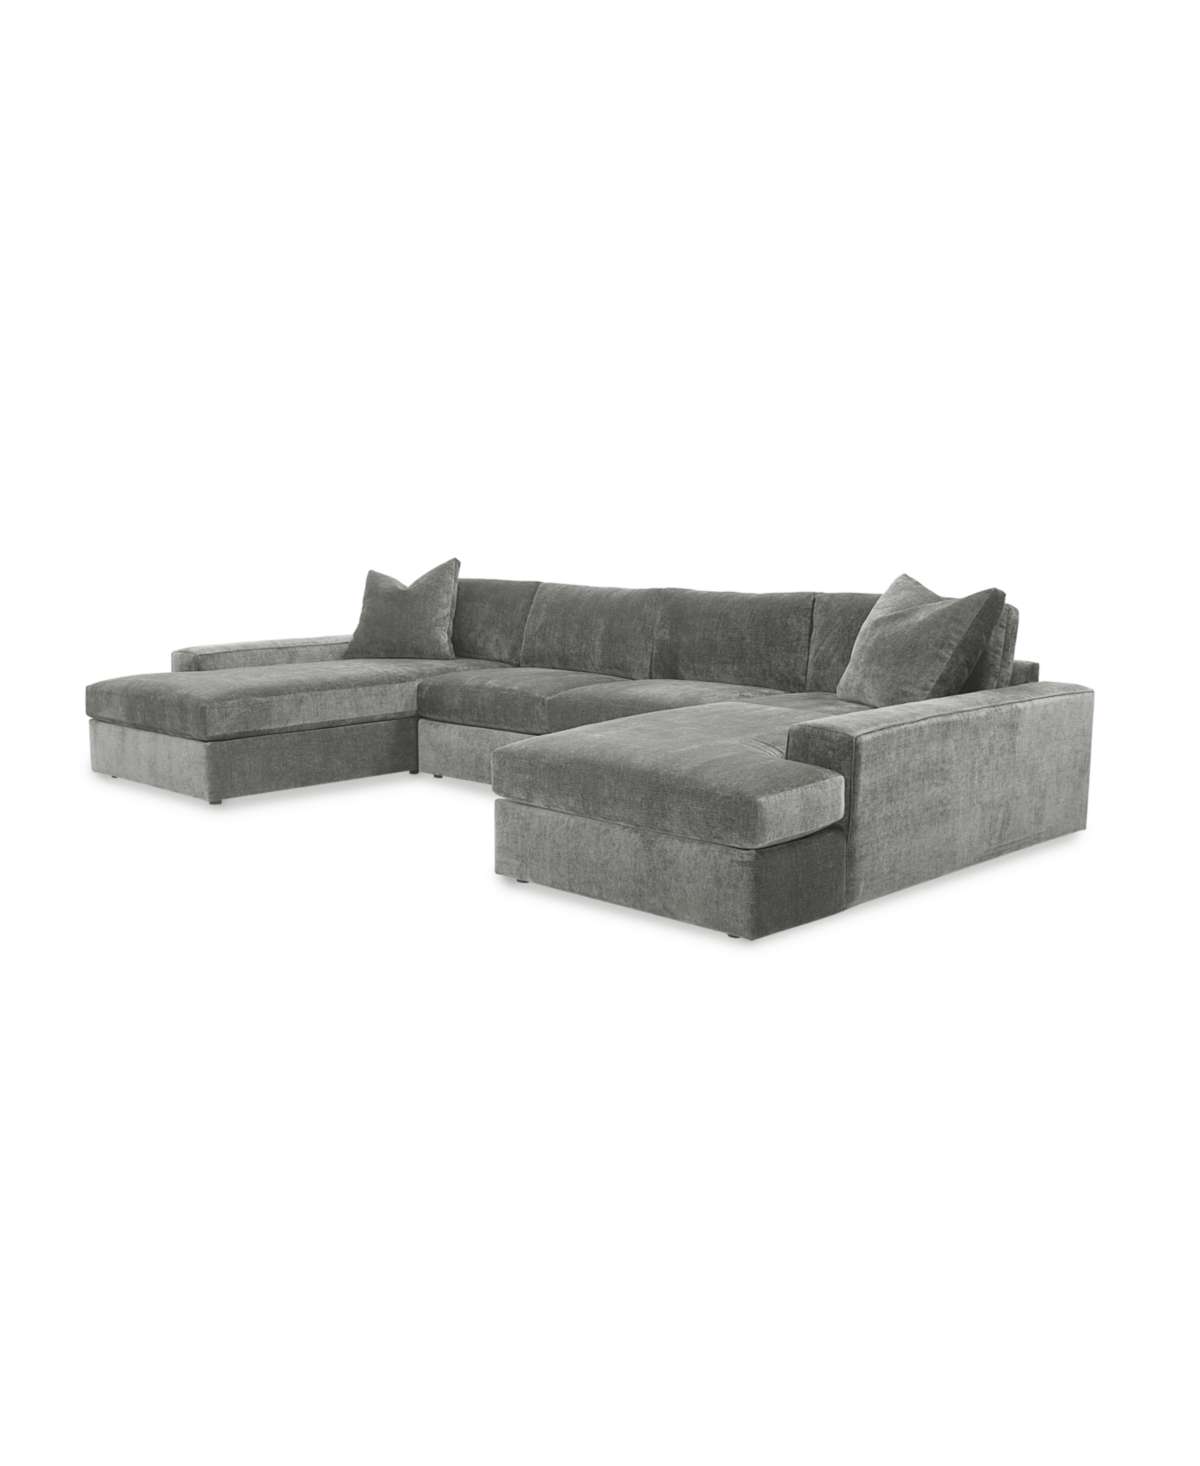 Furniture Michola 161" 3-pc. Fabric Sectional With Double Chaise, Created For Macy's In Zion Stone